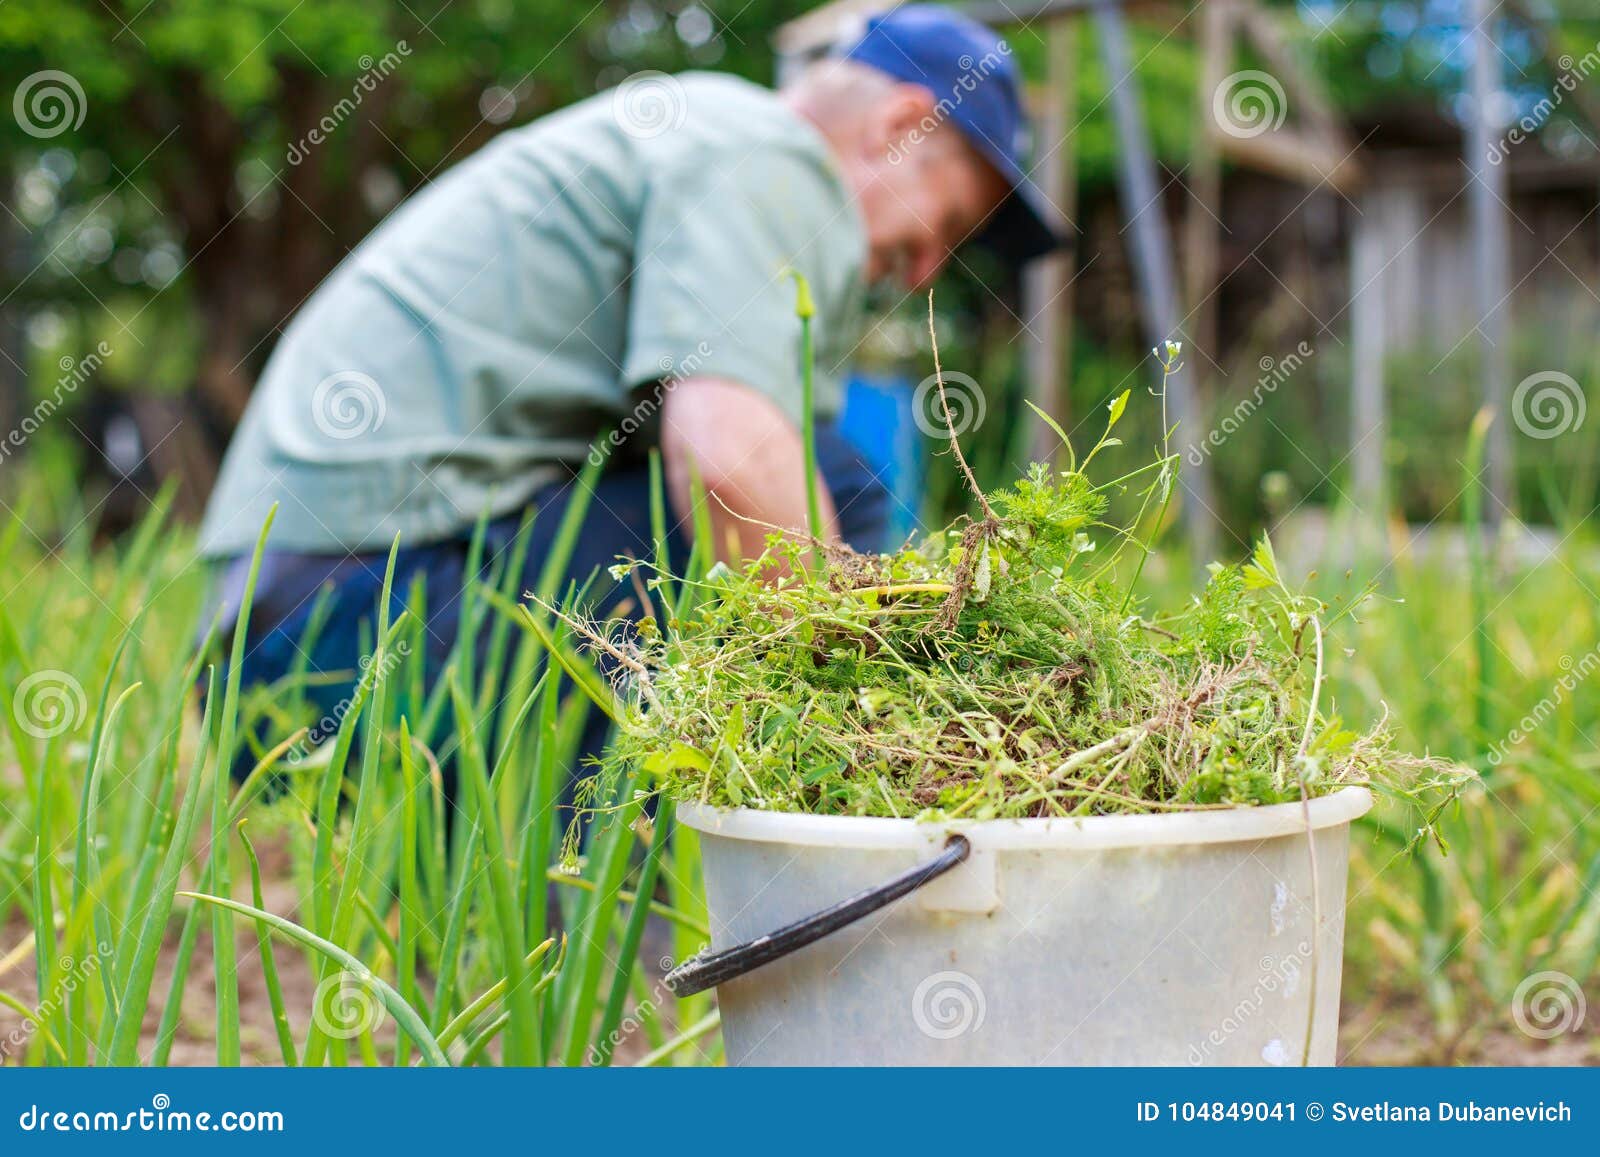 A man is weeding beds. stock image. Image of growing ...